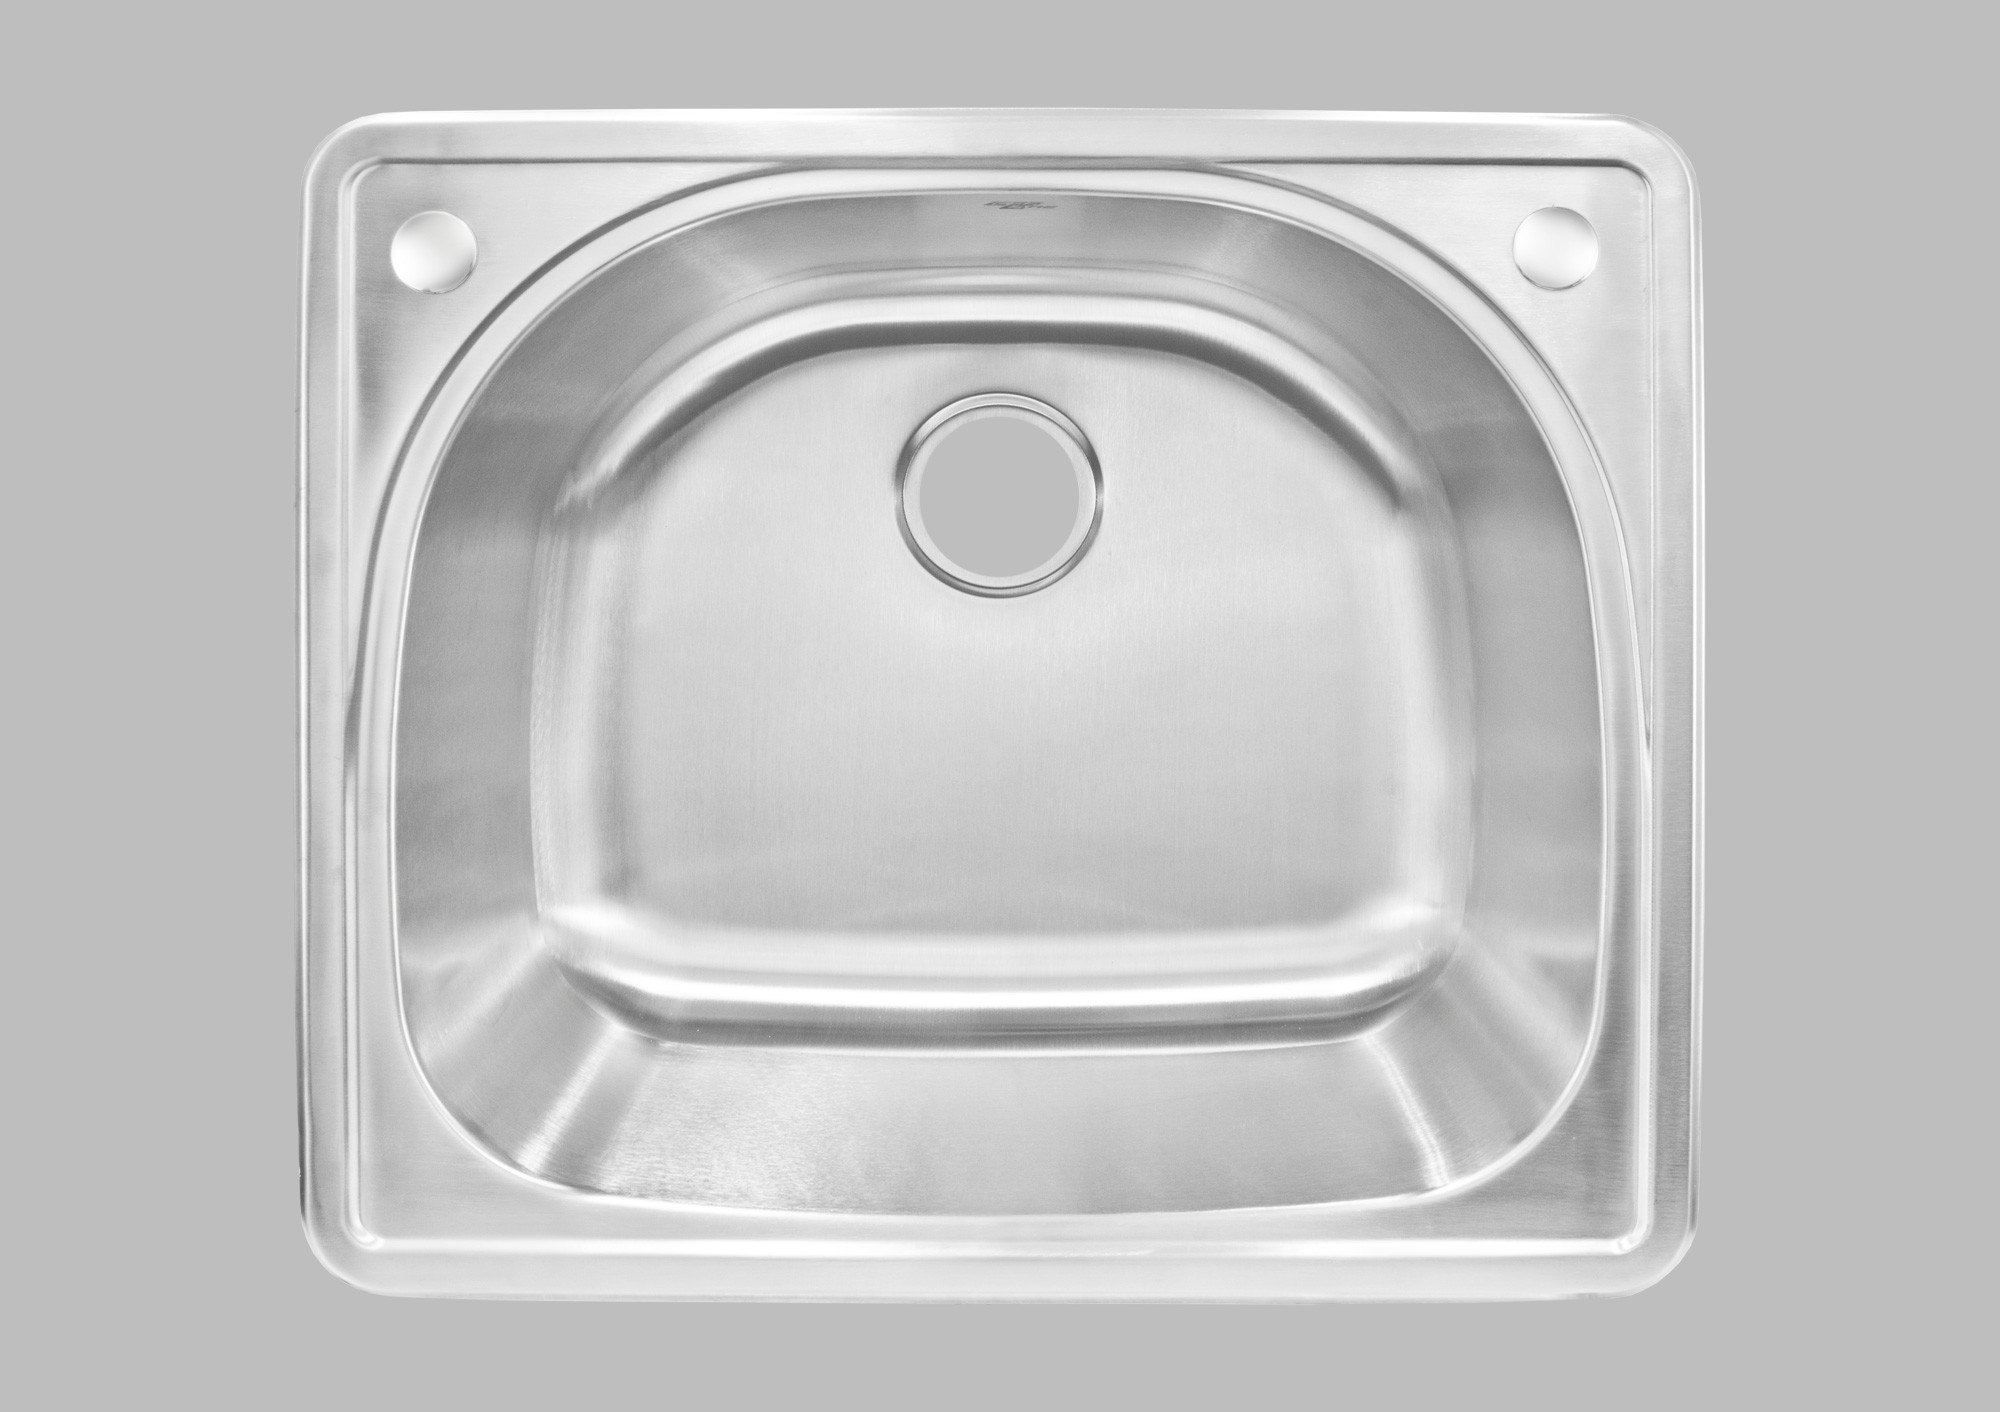 LESS CARE LT91 25 INCH KITCHEN AND BAR TOP MOUNT SINK